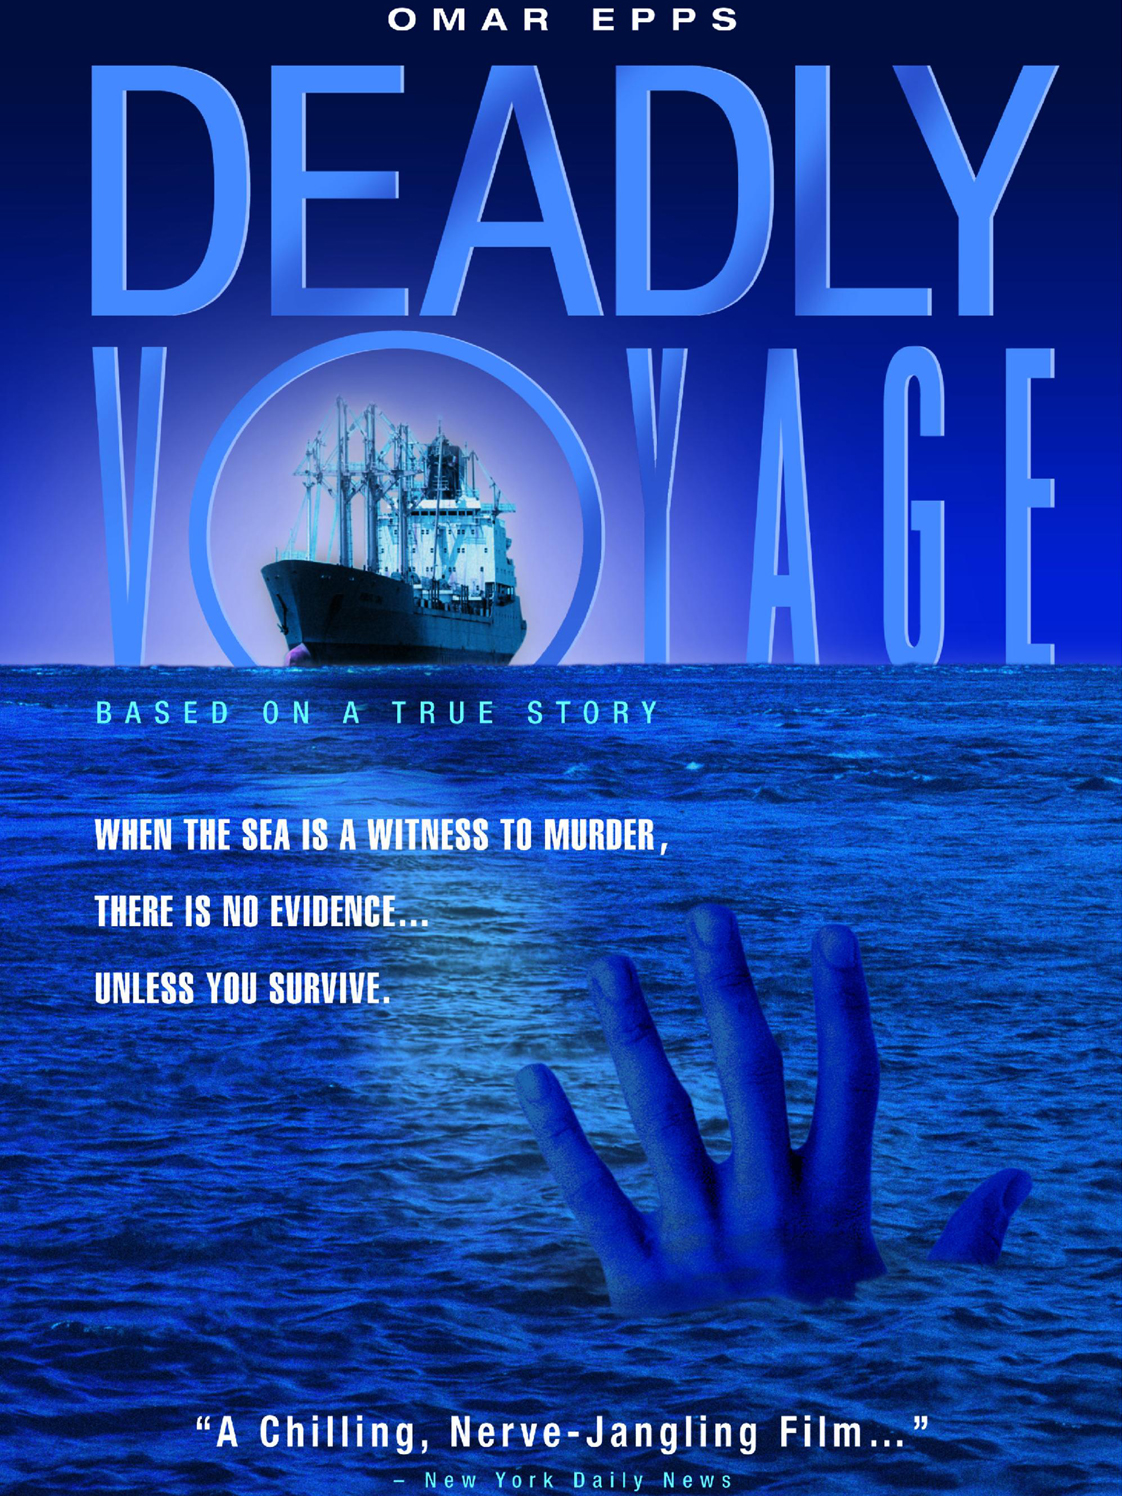 deadly voyage full movie free download